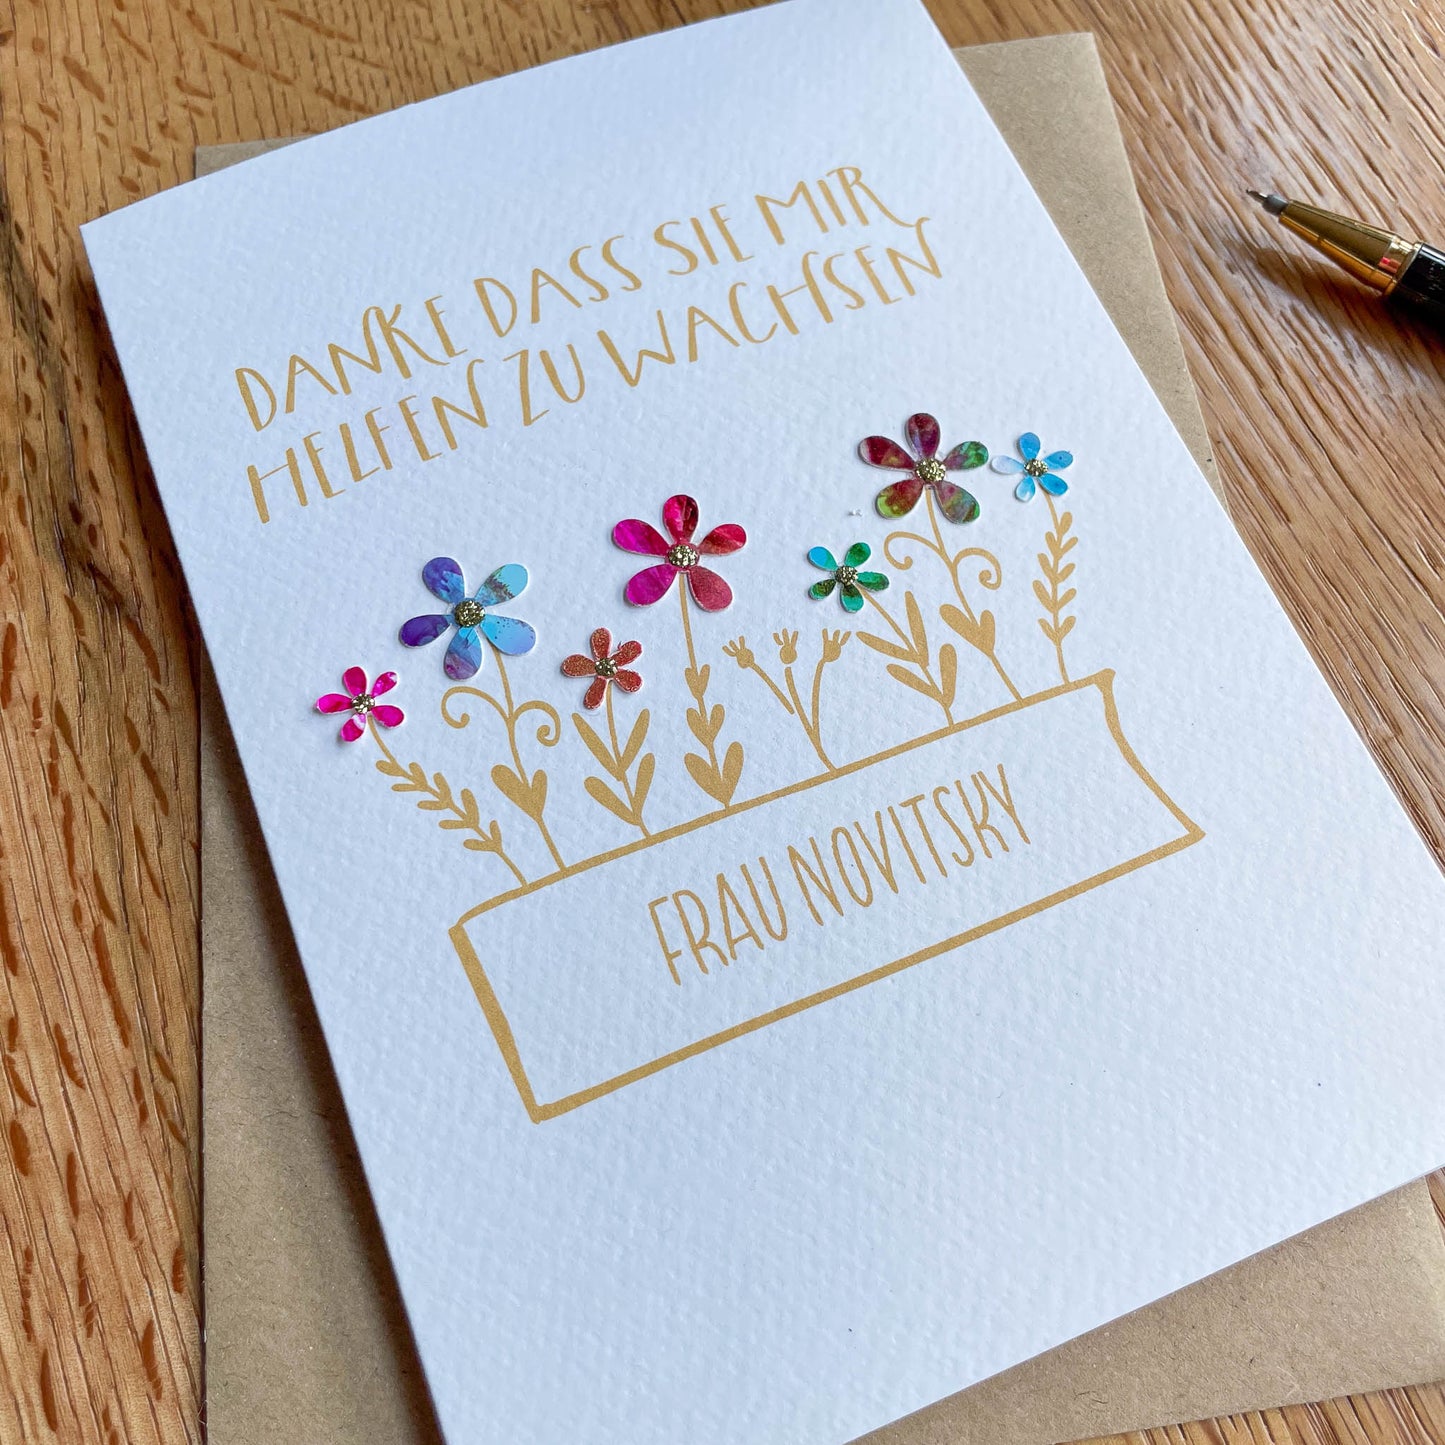 Personalised Teacher Appreciation Card "Thank you for helping me grow" in German